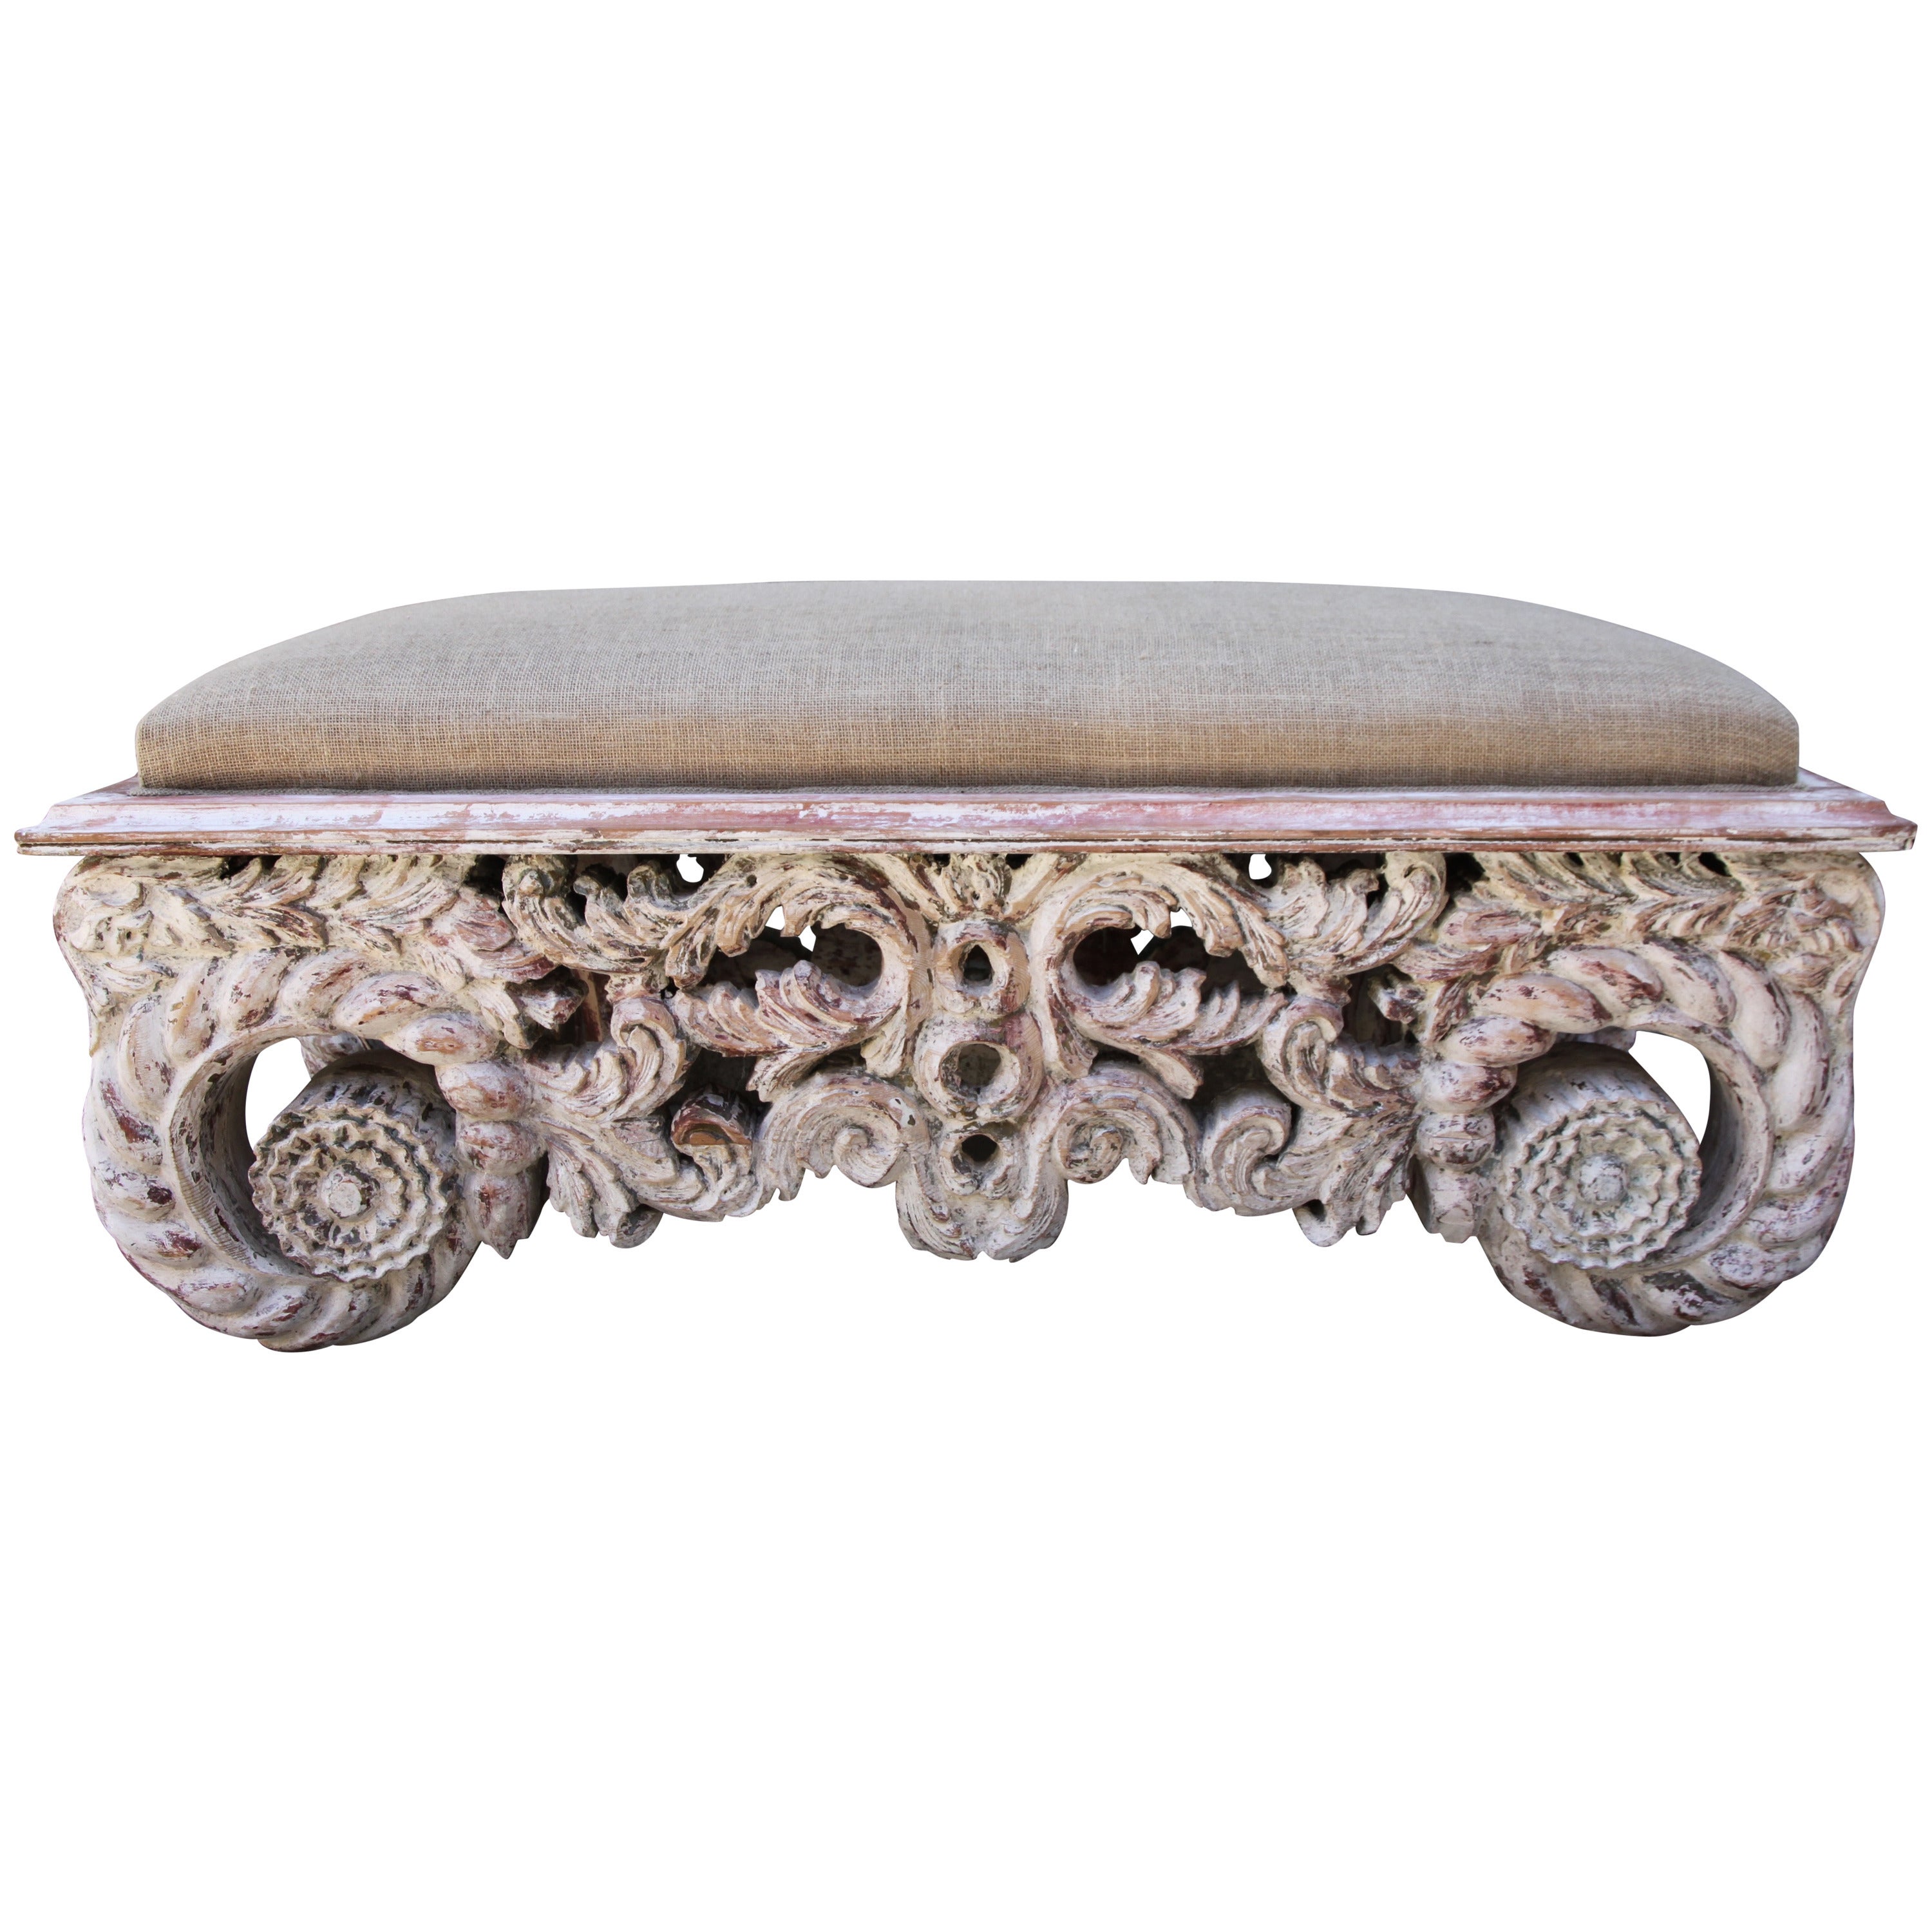 Italian Carved Rococo Style Bench